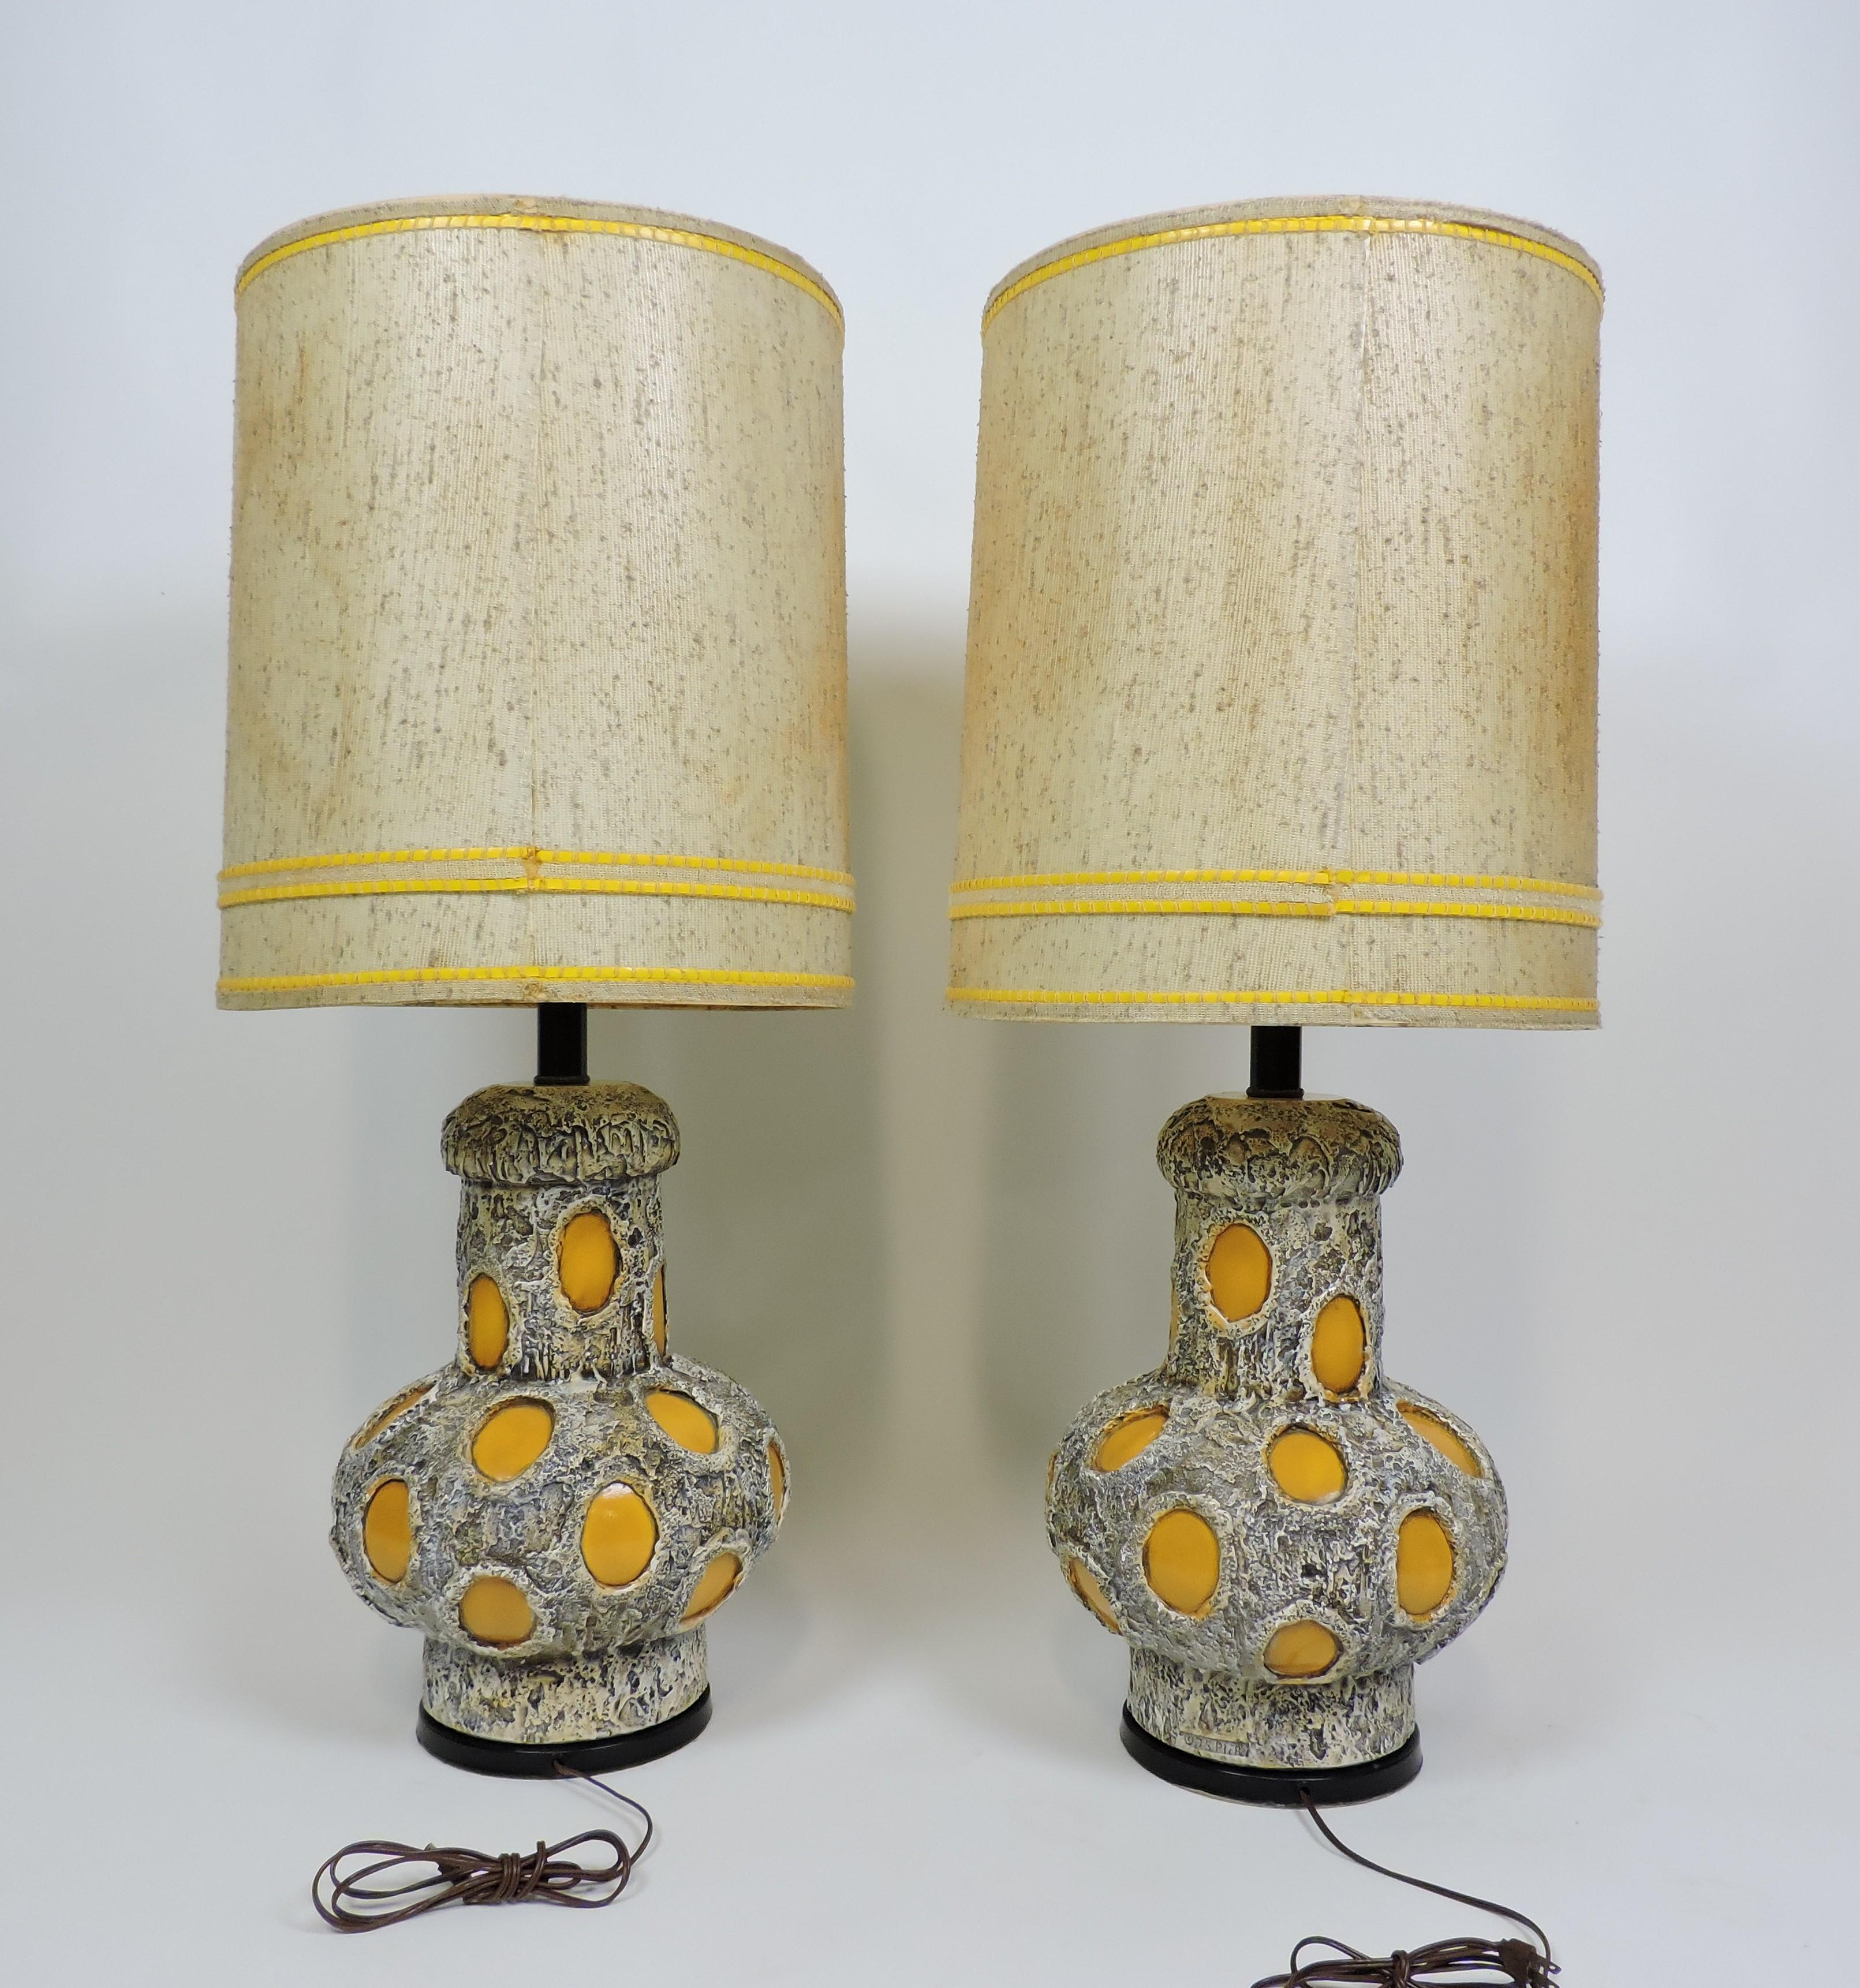 Painted Pair of Monumental Size Mid-Century Modern Pieri Tullio Table Lamps For Sale